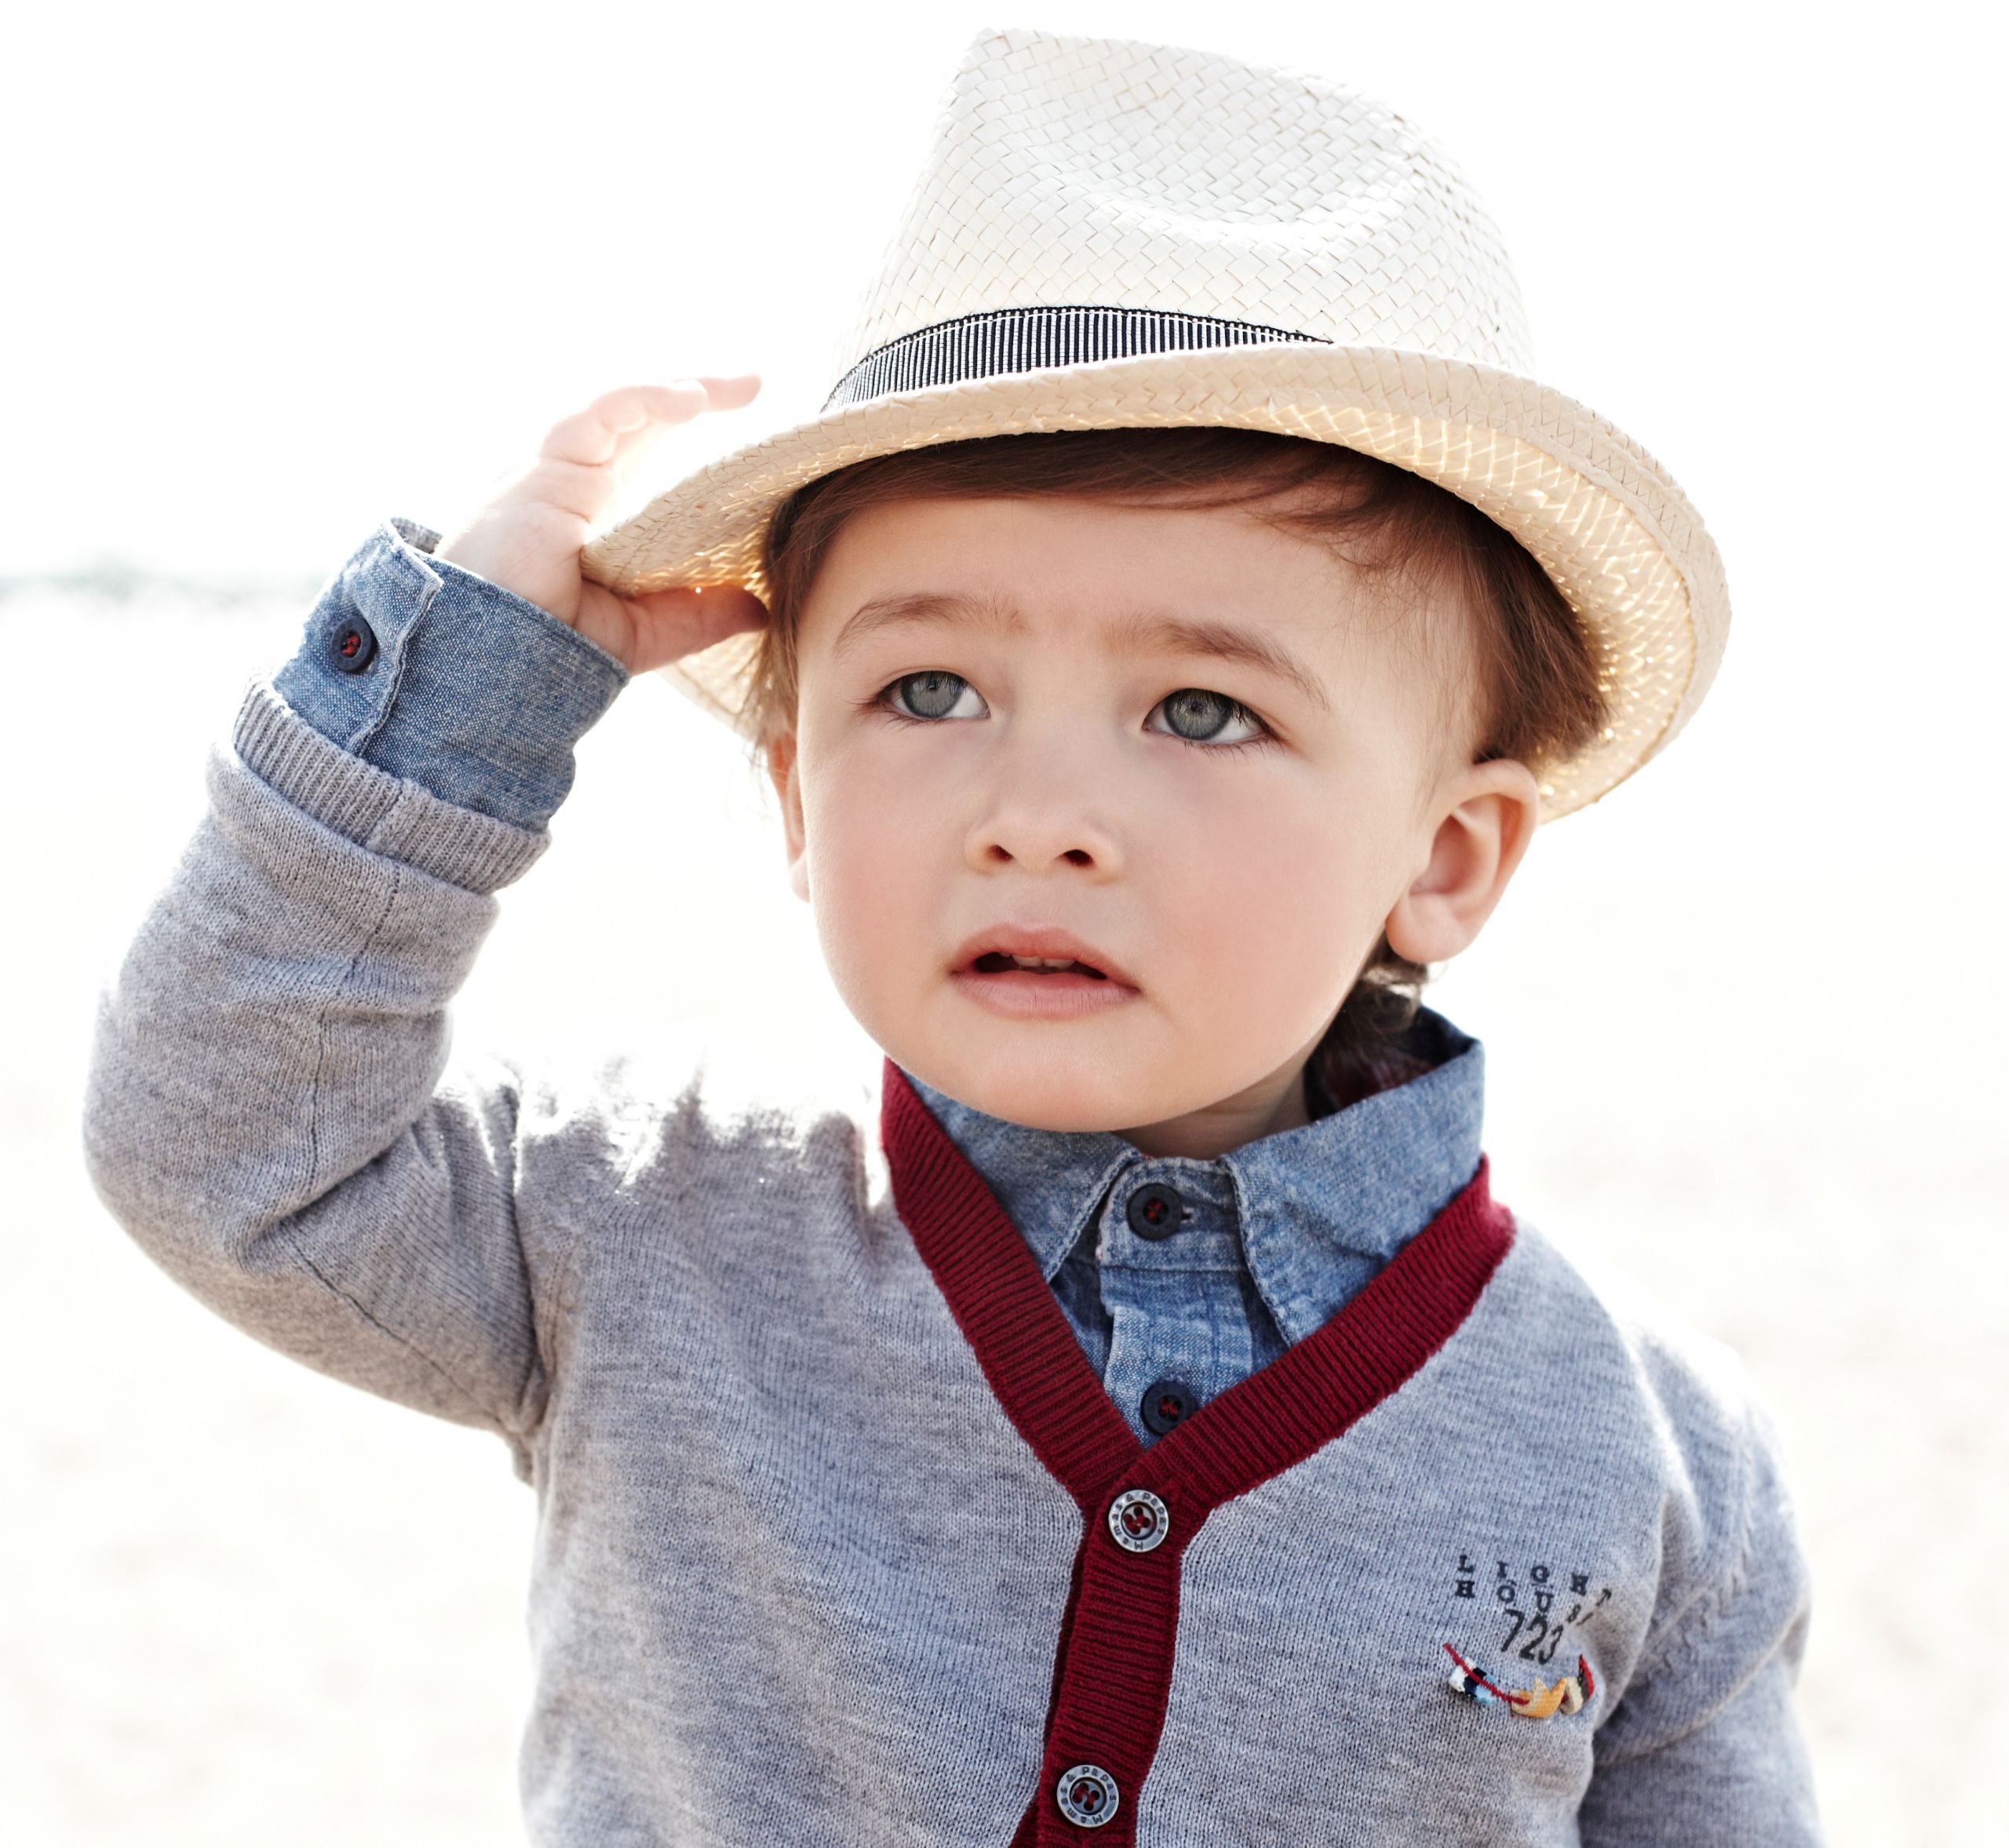 Baby Fashion Dress
 Importance of Baby Clothing for their Beauty and Care